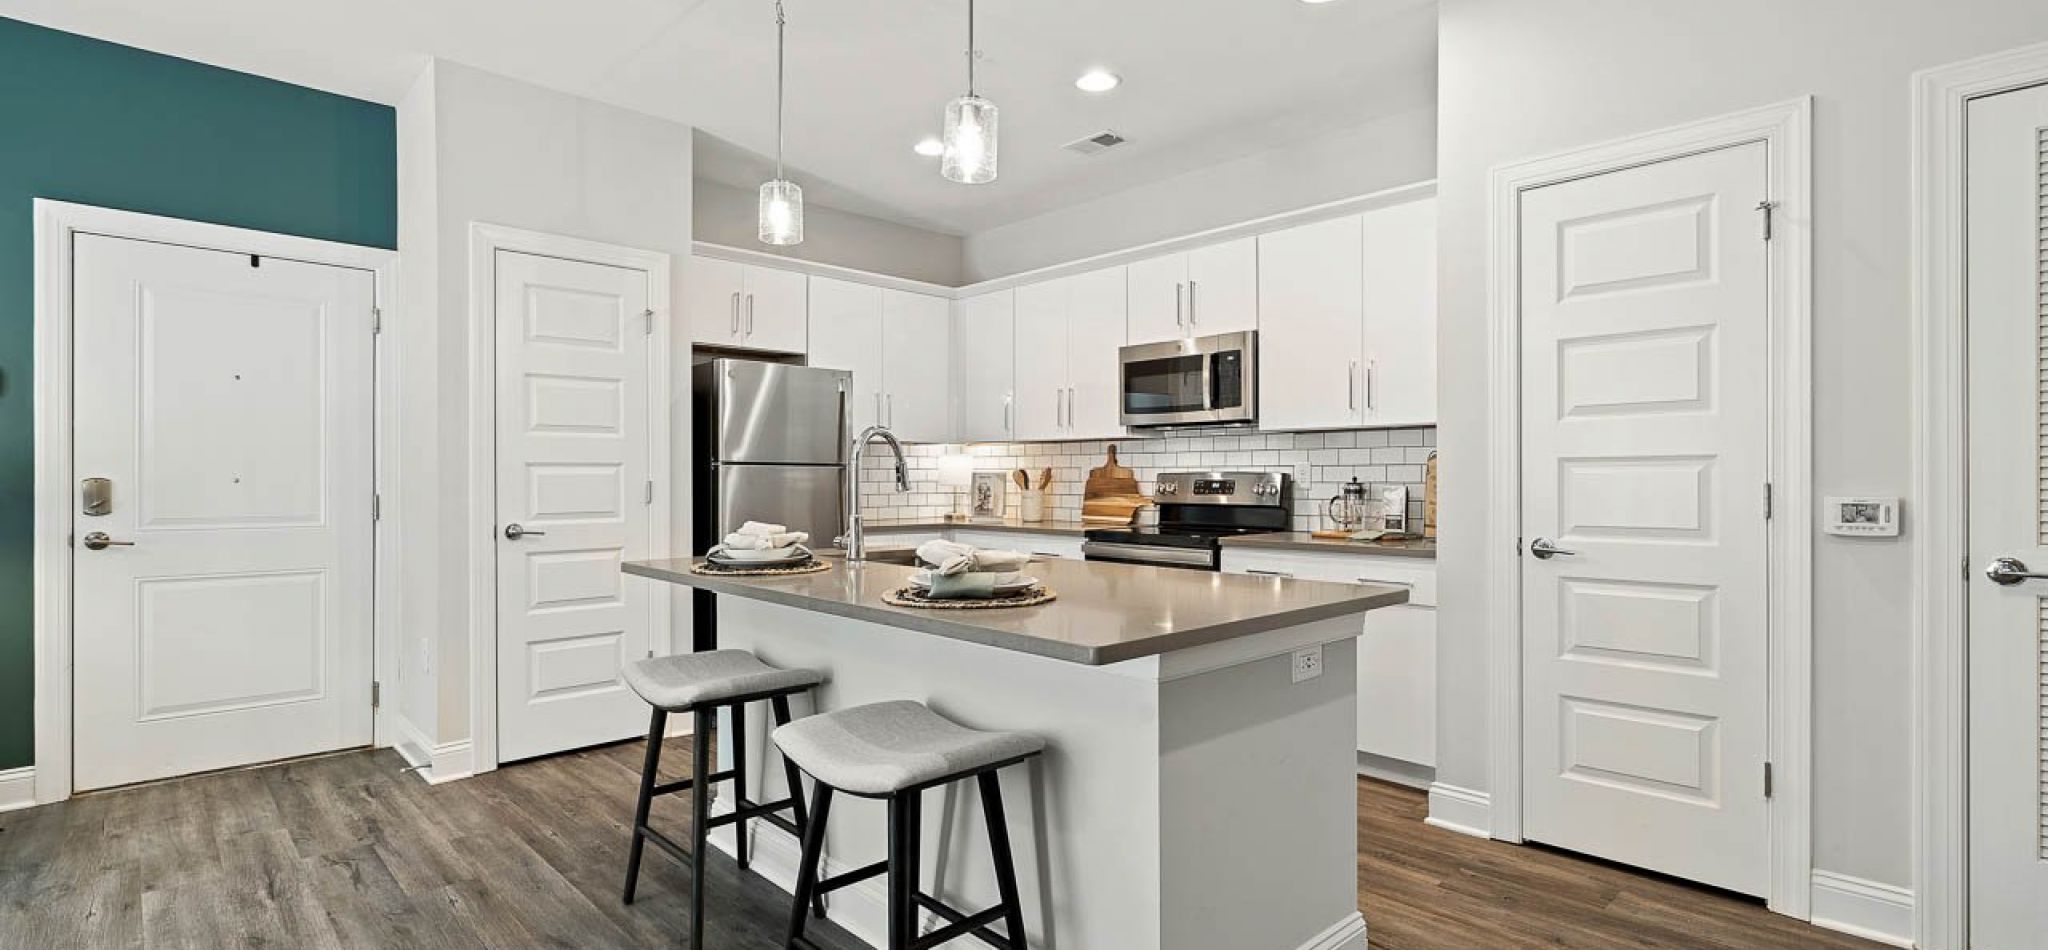 Hawthorne Waterstone apartment kitchen interior with kitchen island, stainless steel appliances, and white cabinetry